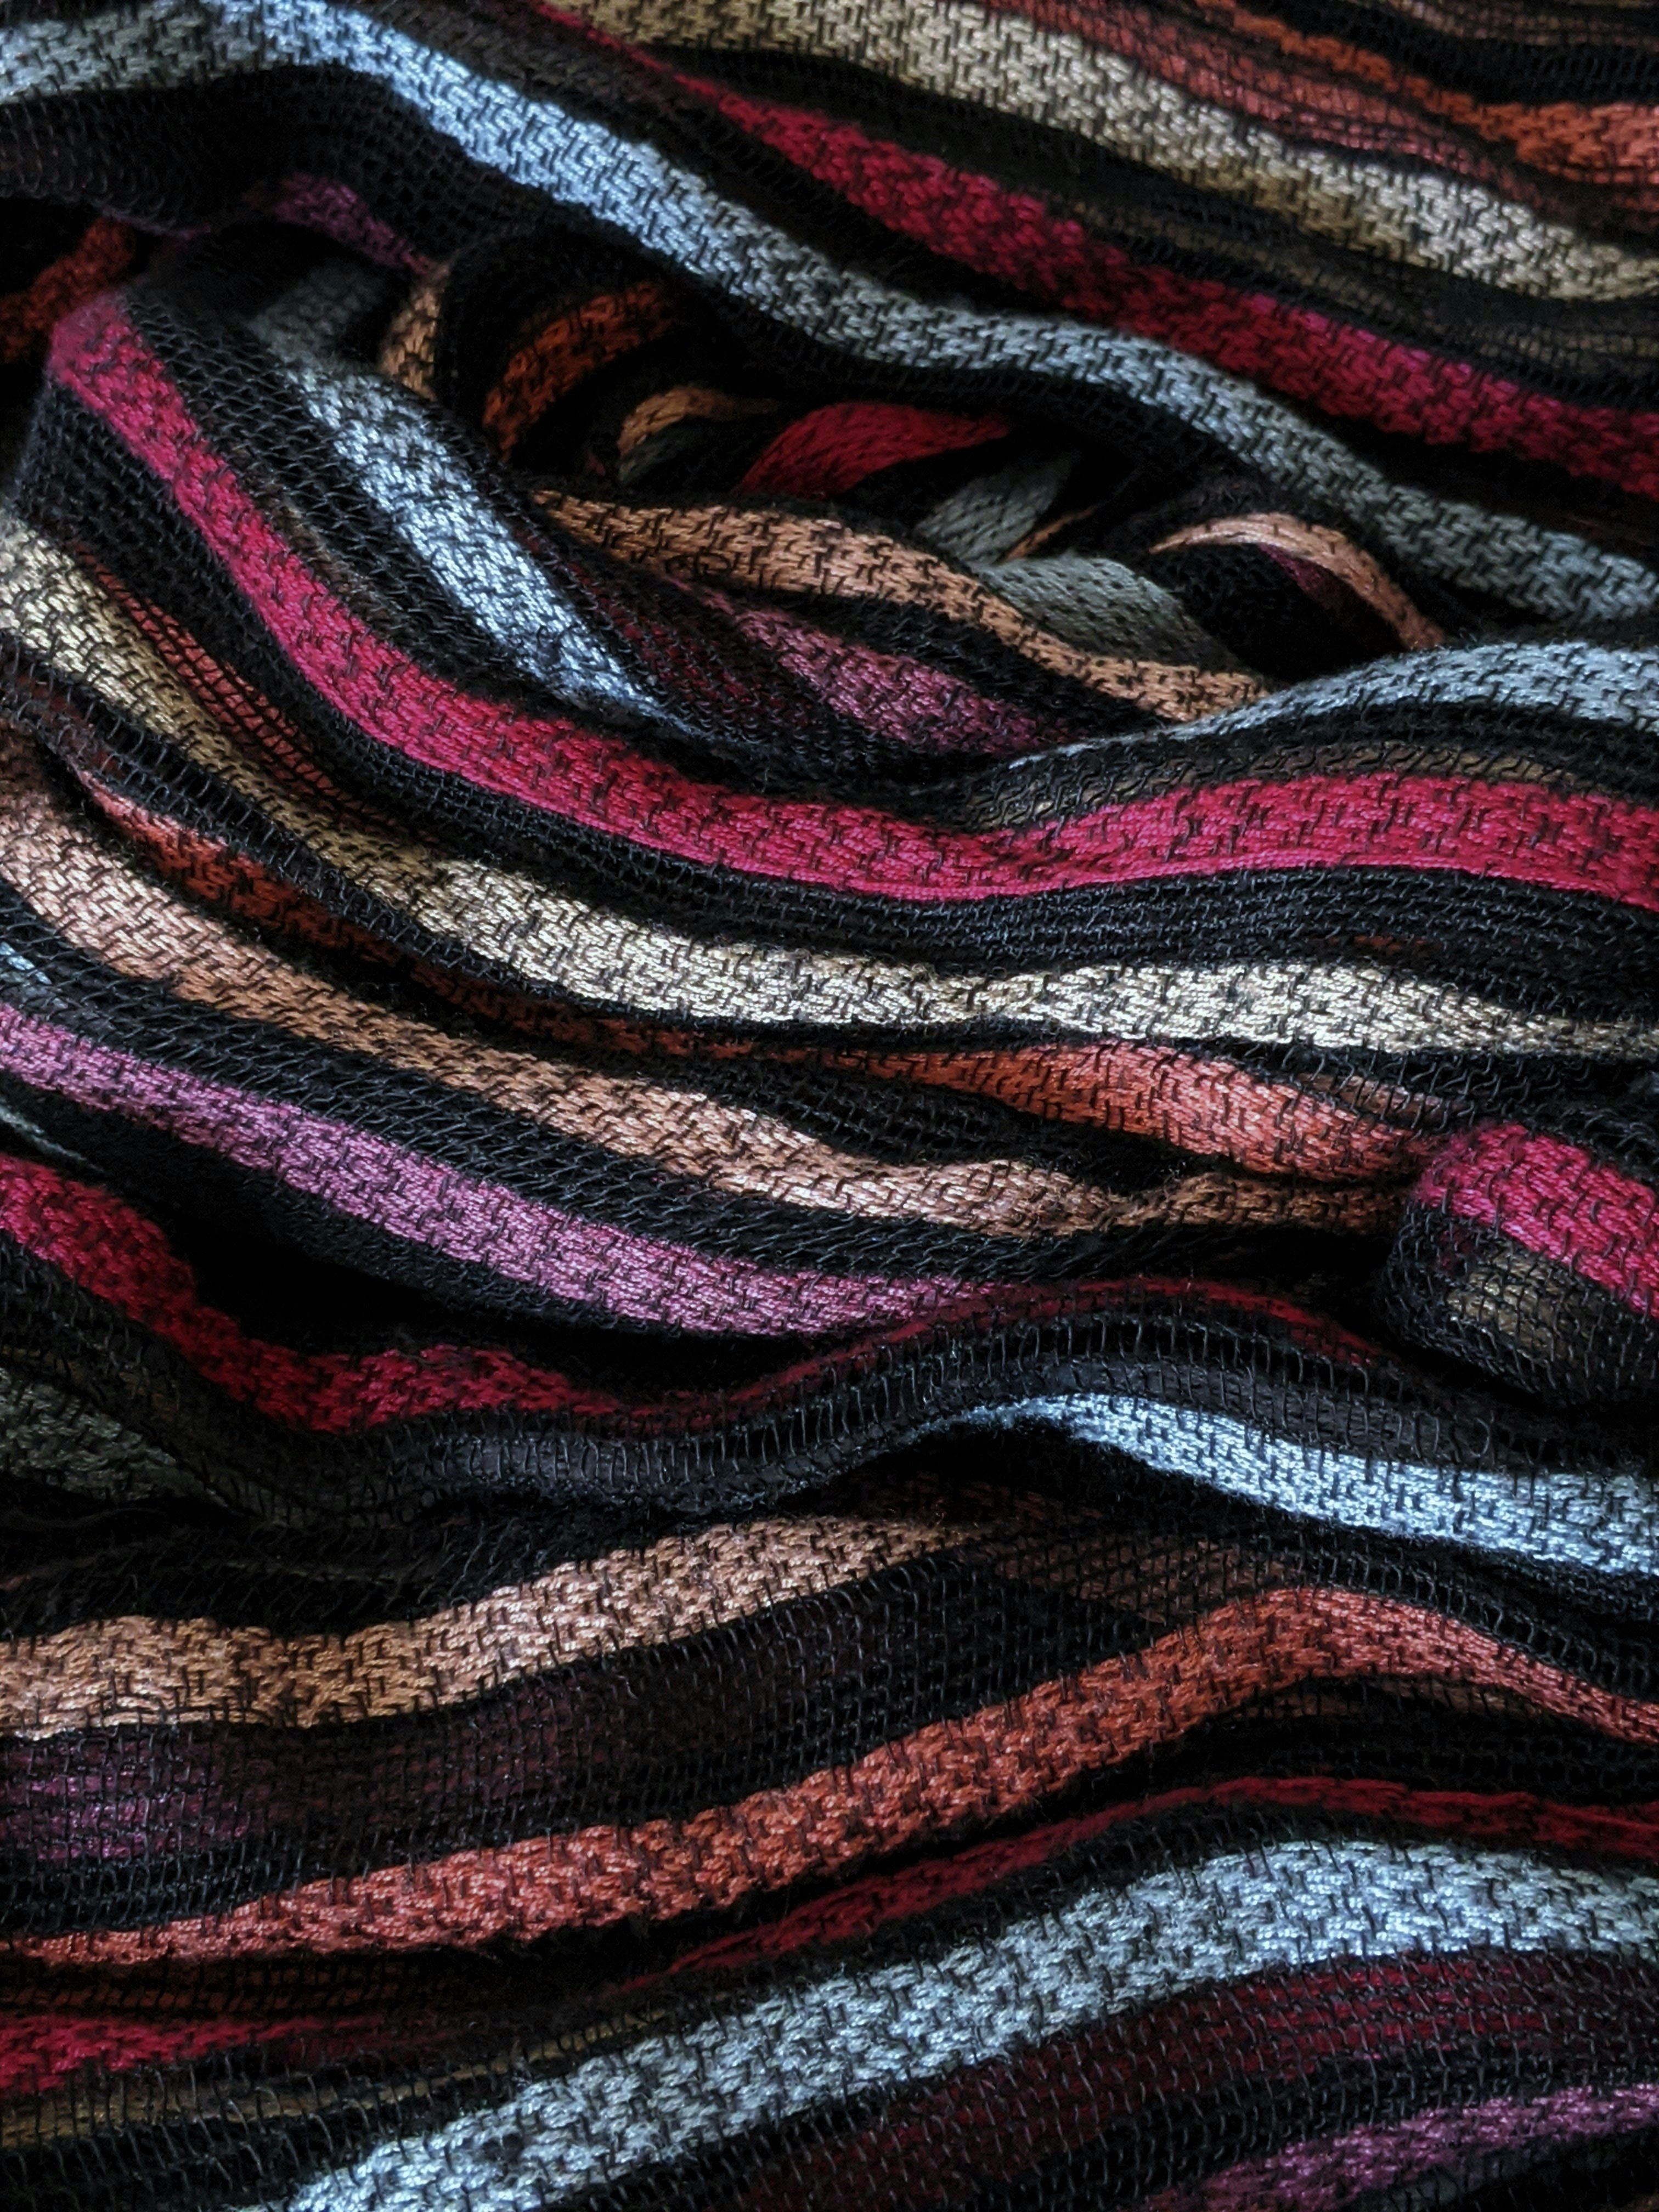 red black and white striped textile